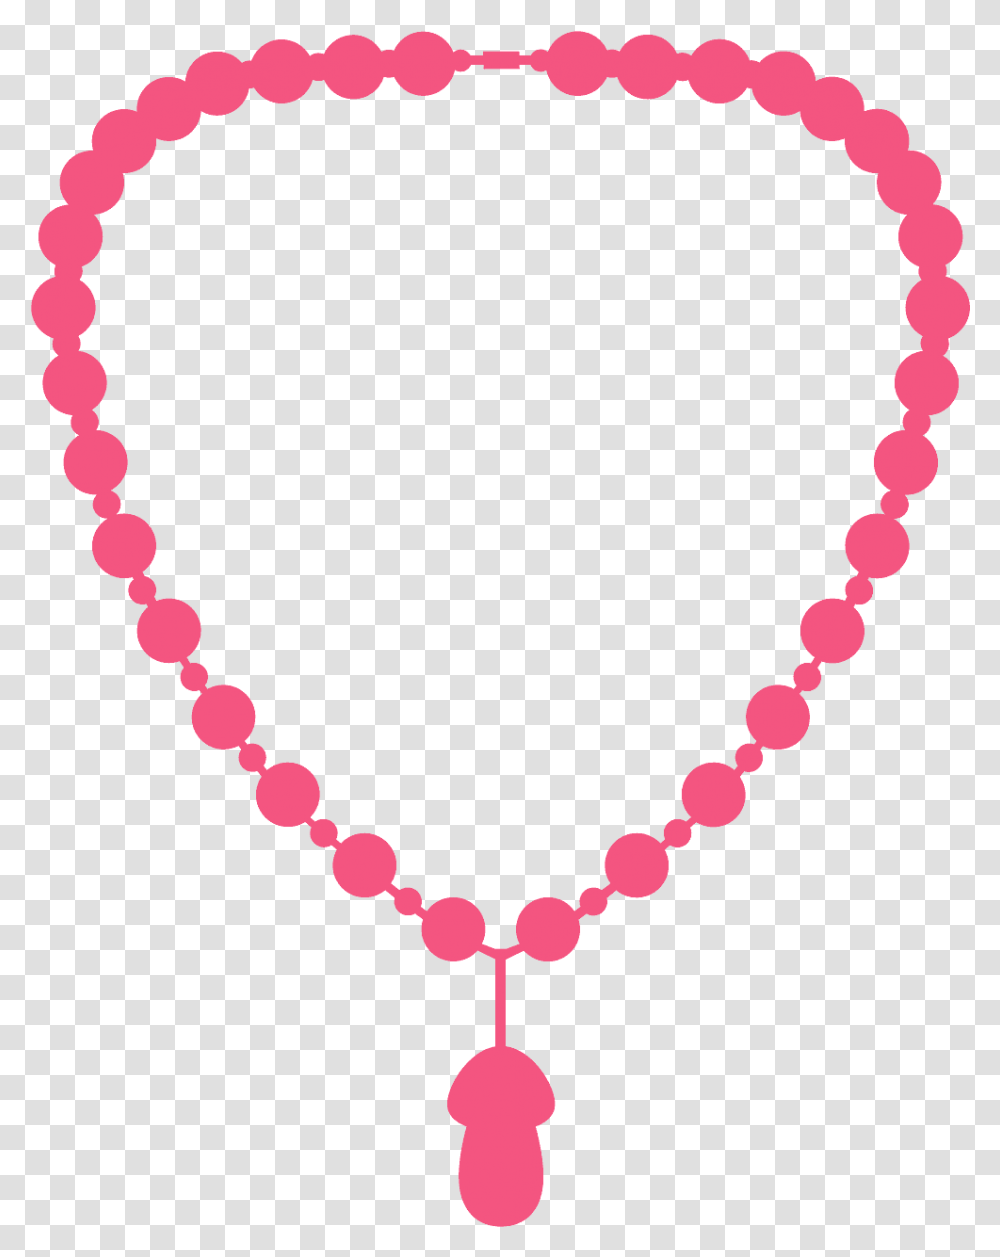 Necklace Bracelet And Earrings Set, Accessories, Accessory, Bead, Bead Necklace Transparent Png